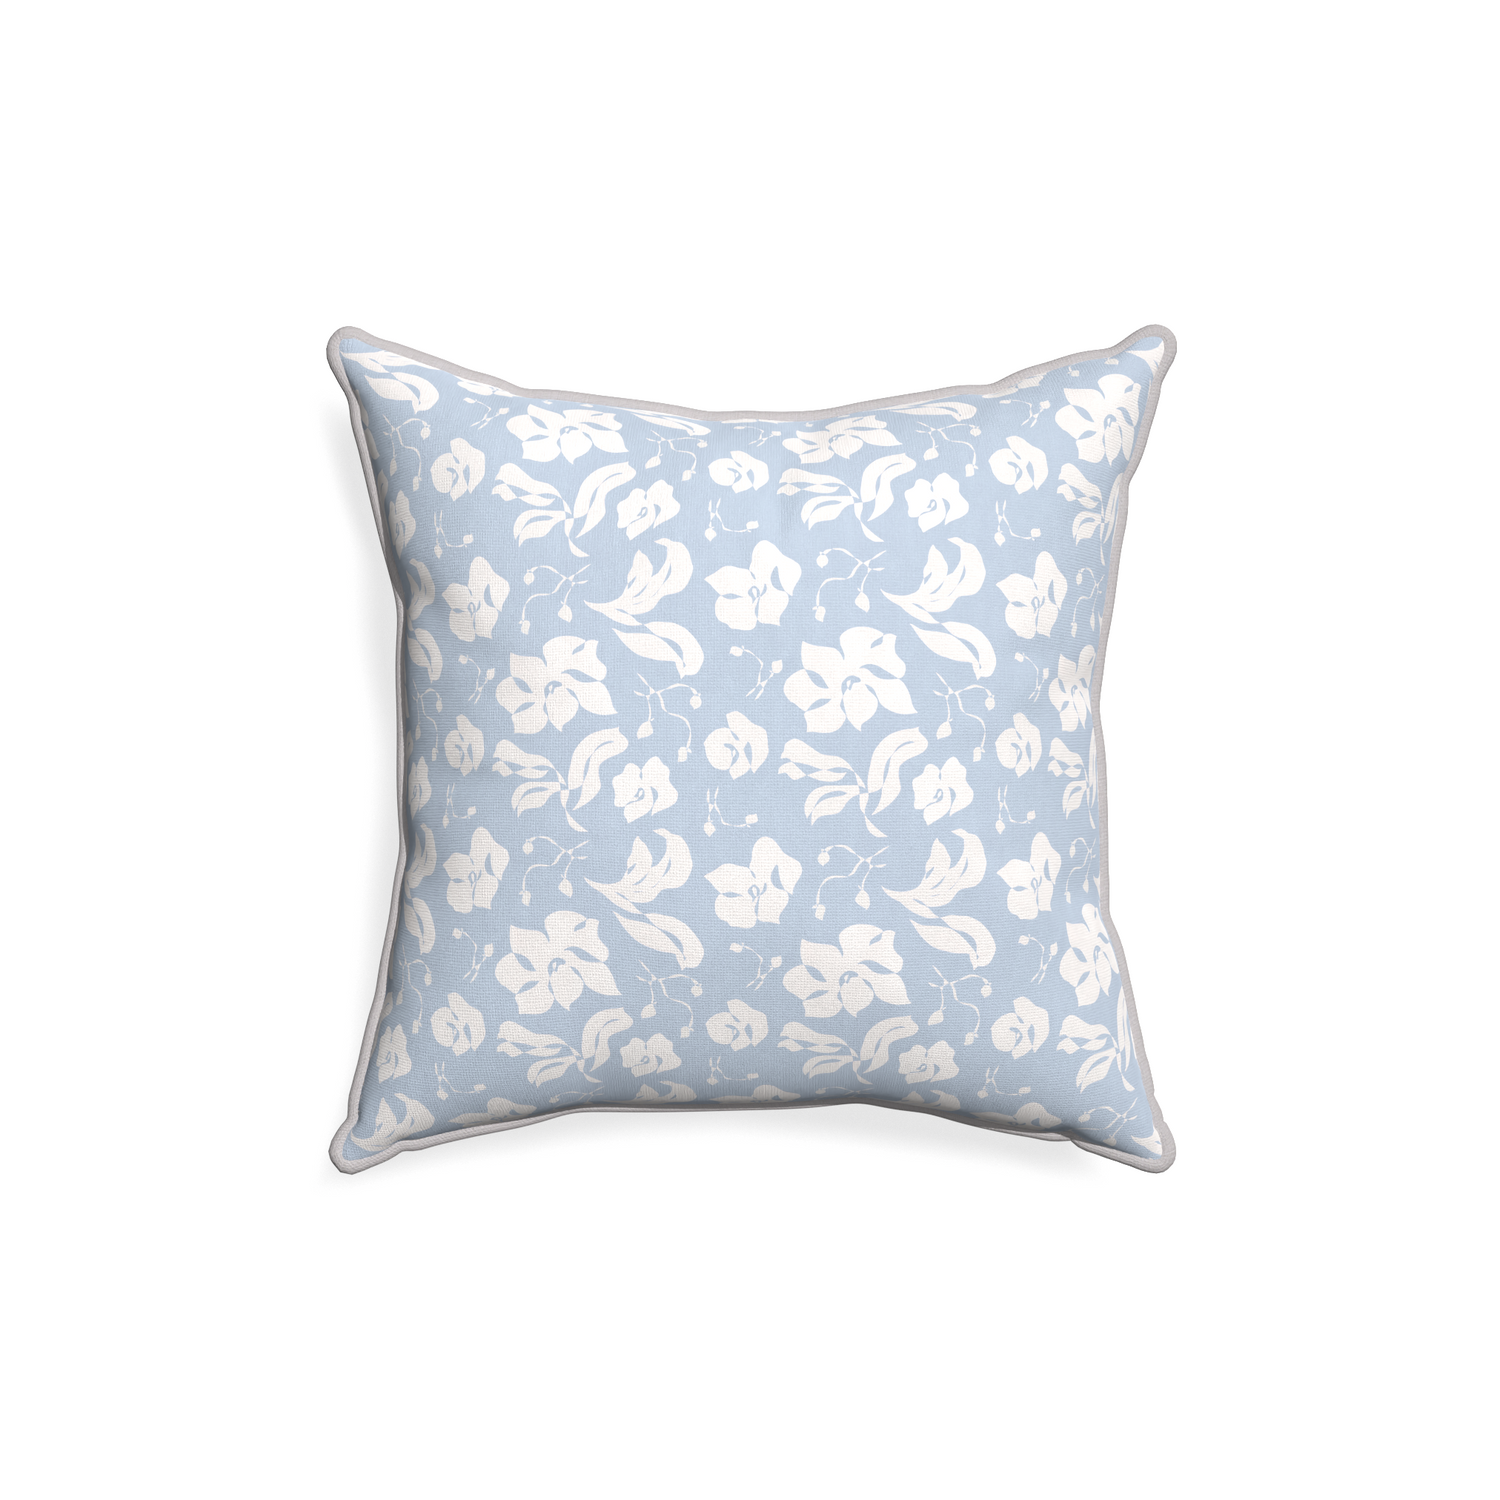 18-square georgia custom pillow with pebble piping on white background